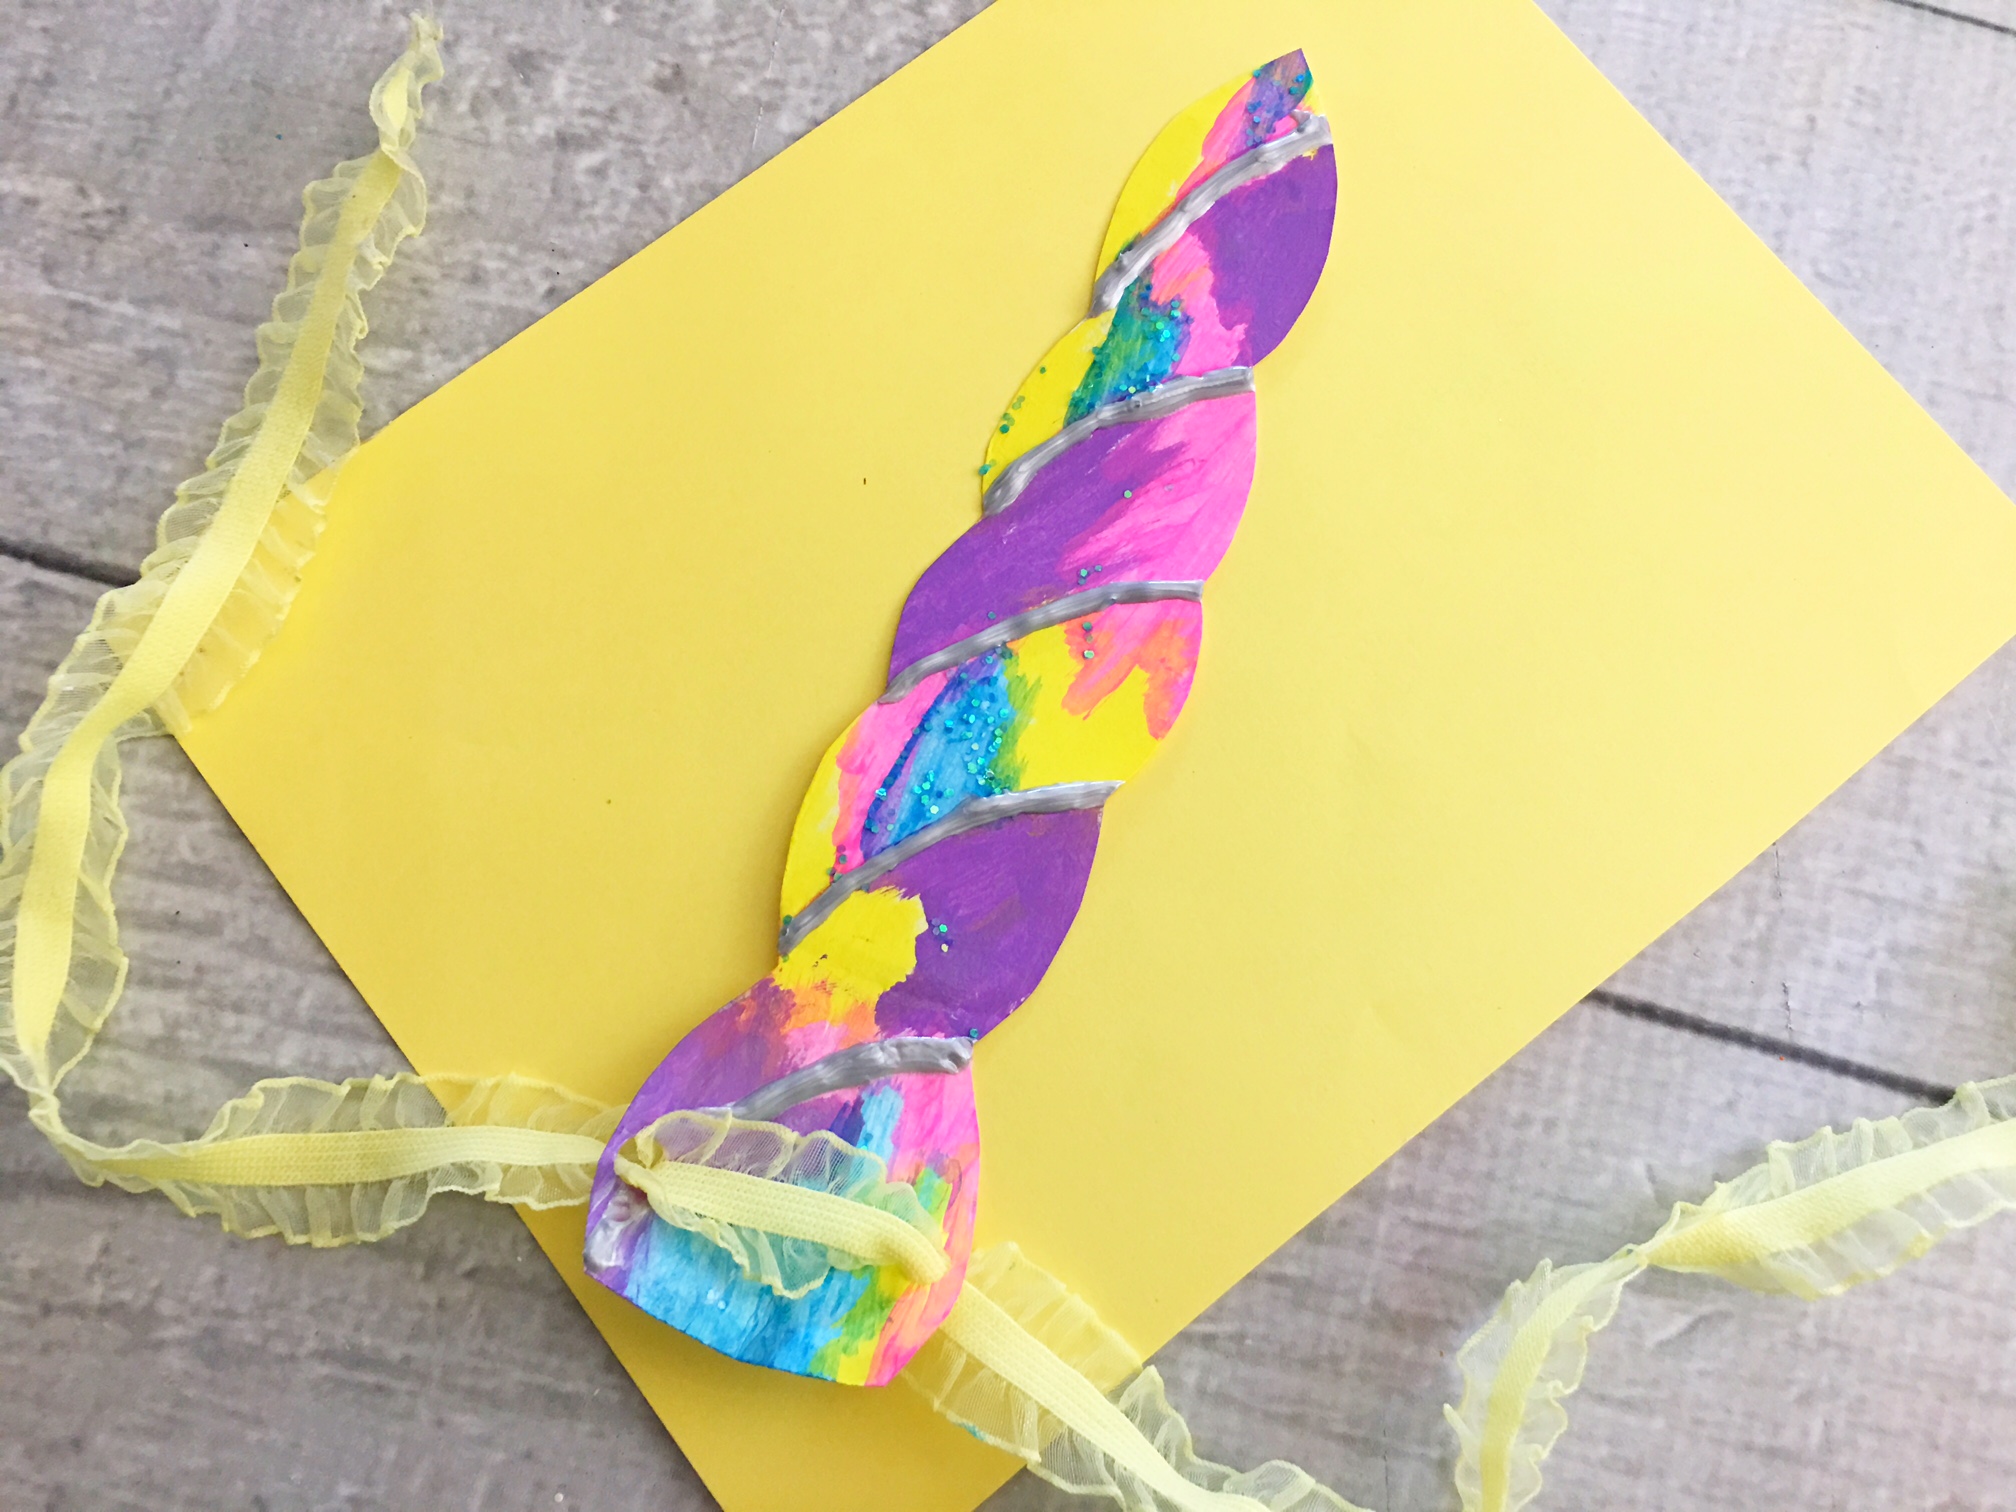 unicorn horn against a yellow paper